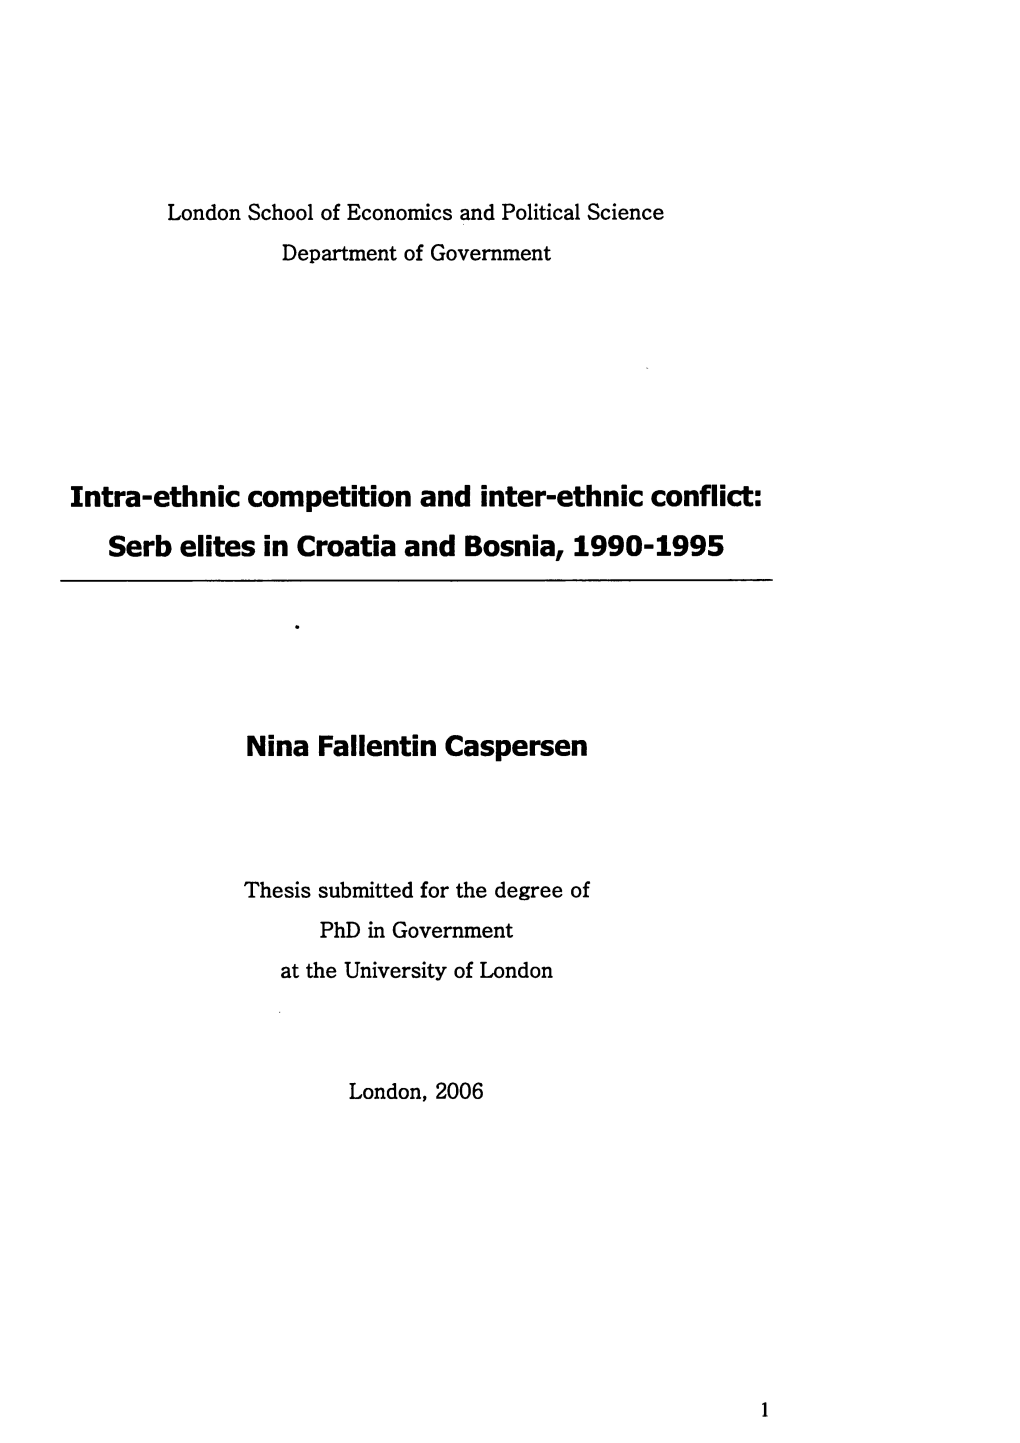 Intra-Ethnic Competition and Inter-Ethnic Conflict: Serb Elites in Croatia and Bosnia, 1990-1995